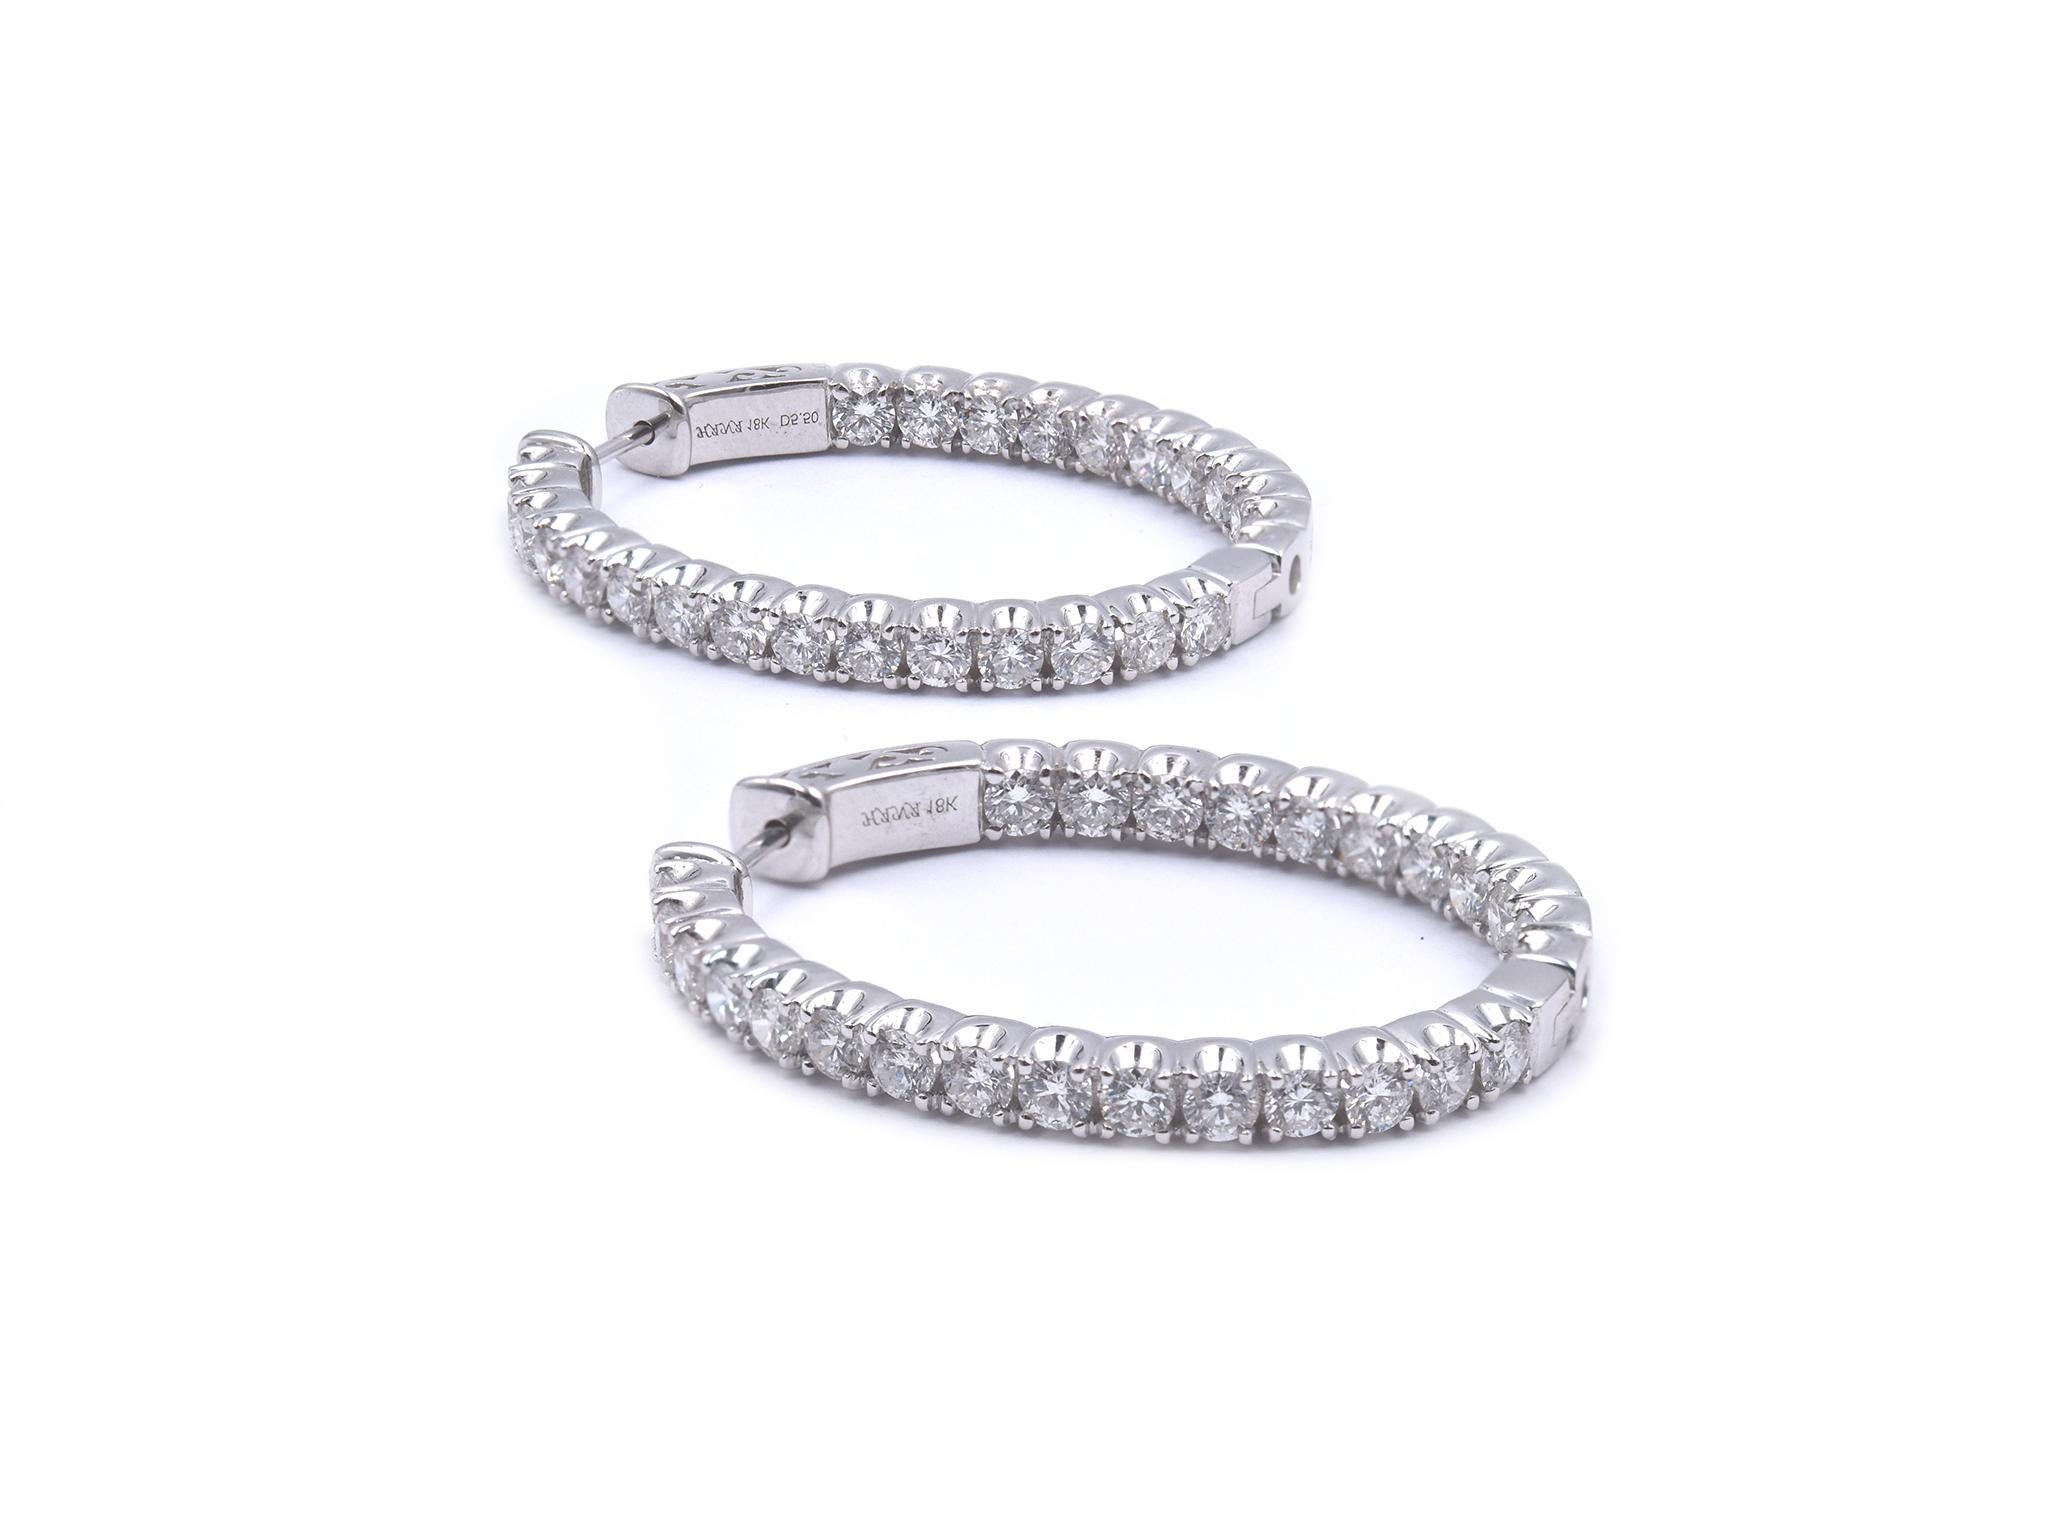 Designer: custom
Material: 18K white gold
Diamonds: 52 round brilliant cut = 5.50cttw
Color: G
Clarity: SI1
Dimensions: earrings measure 40mm long
Weight: 19.51 grams
